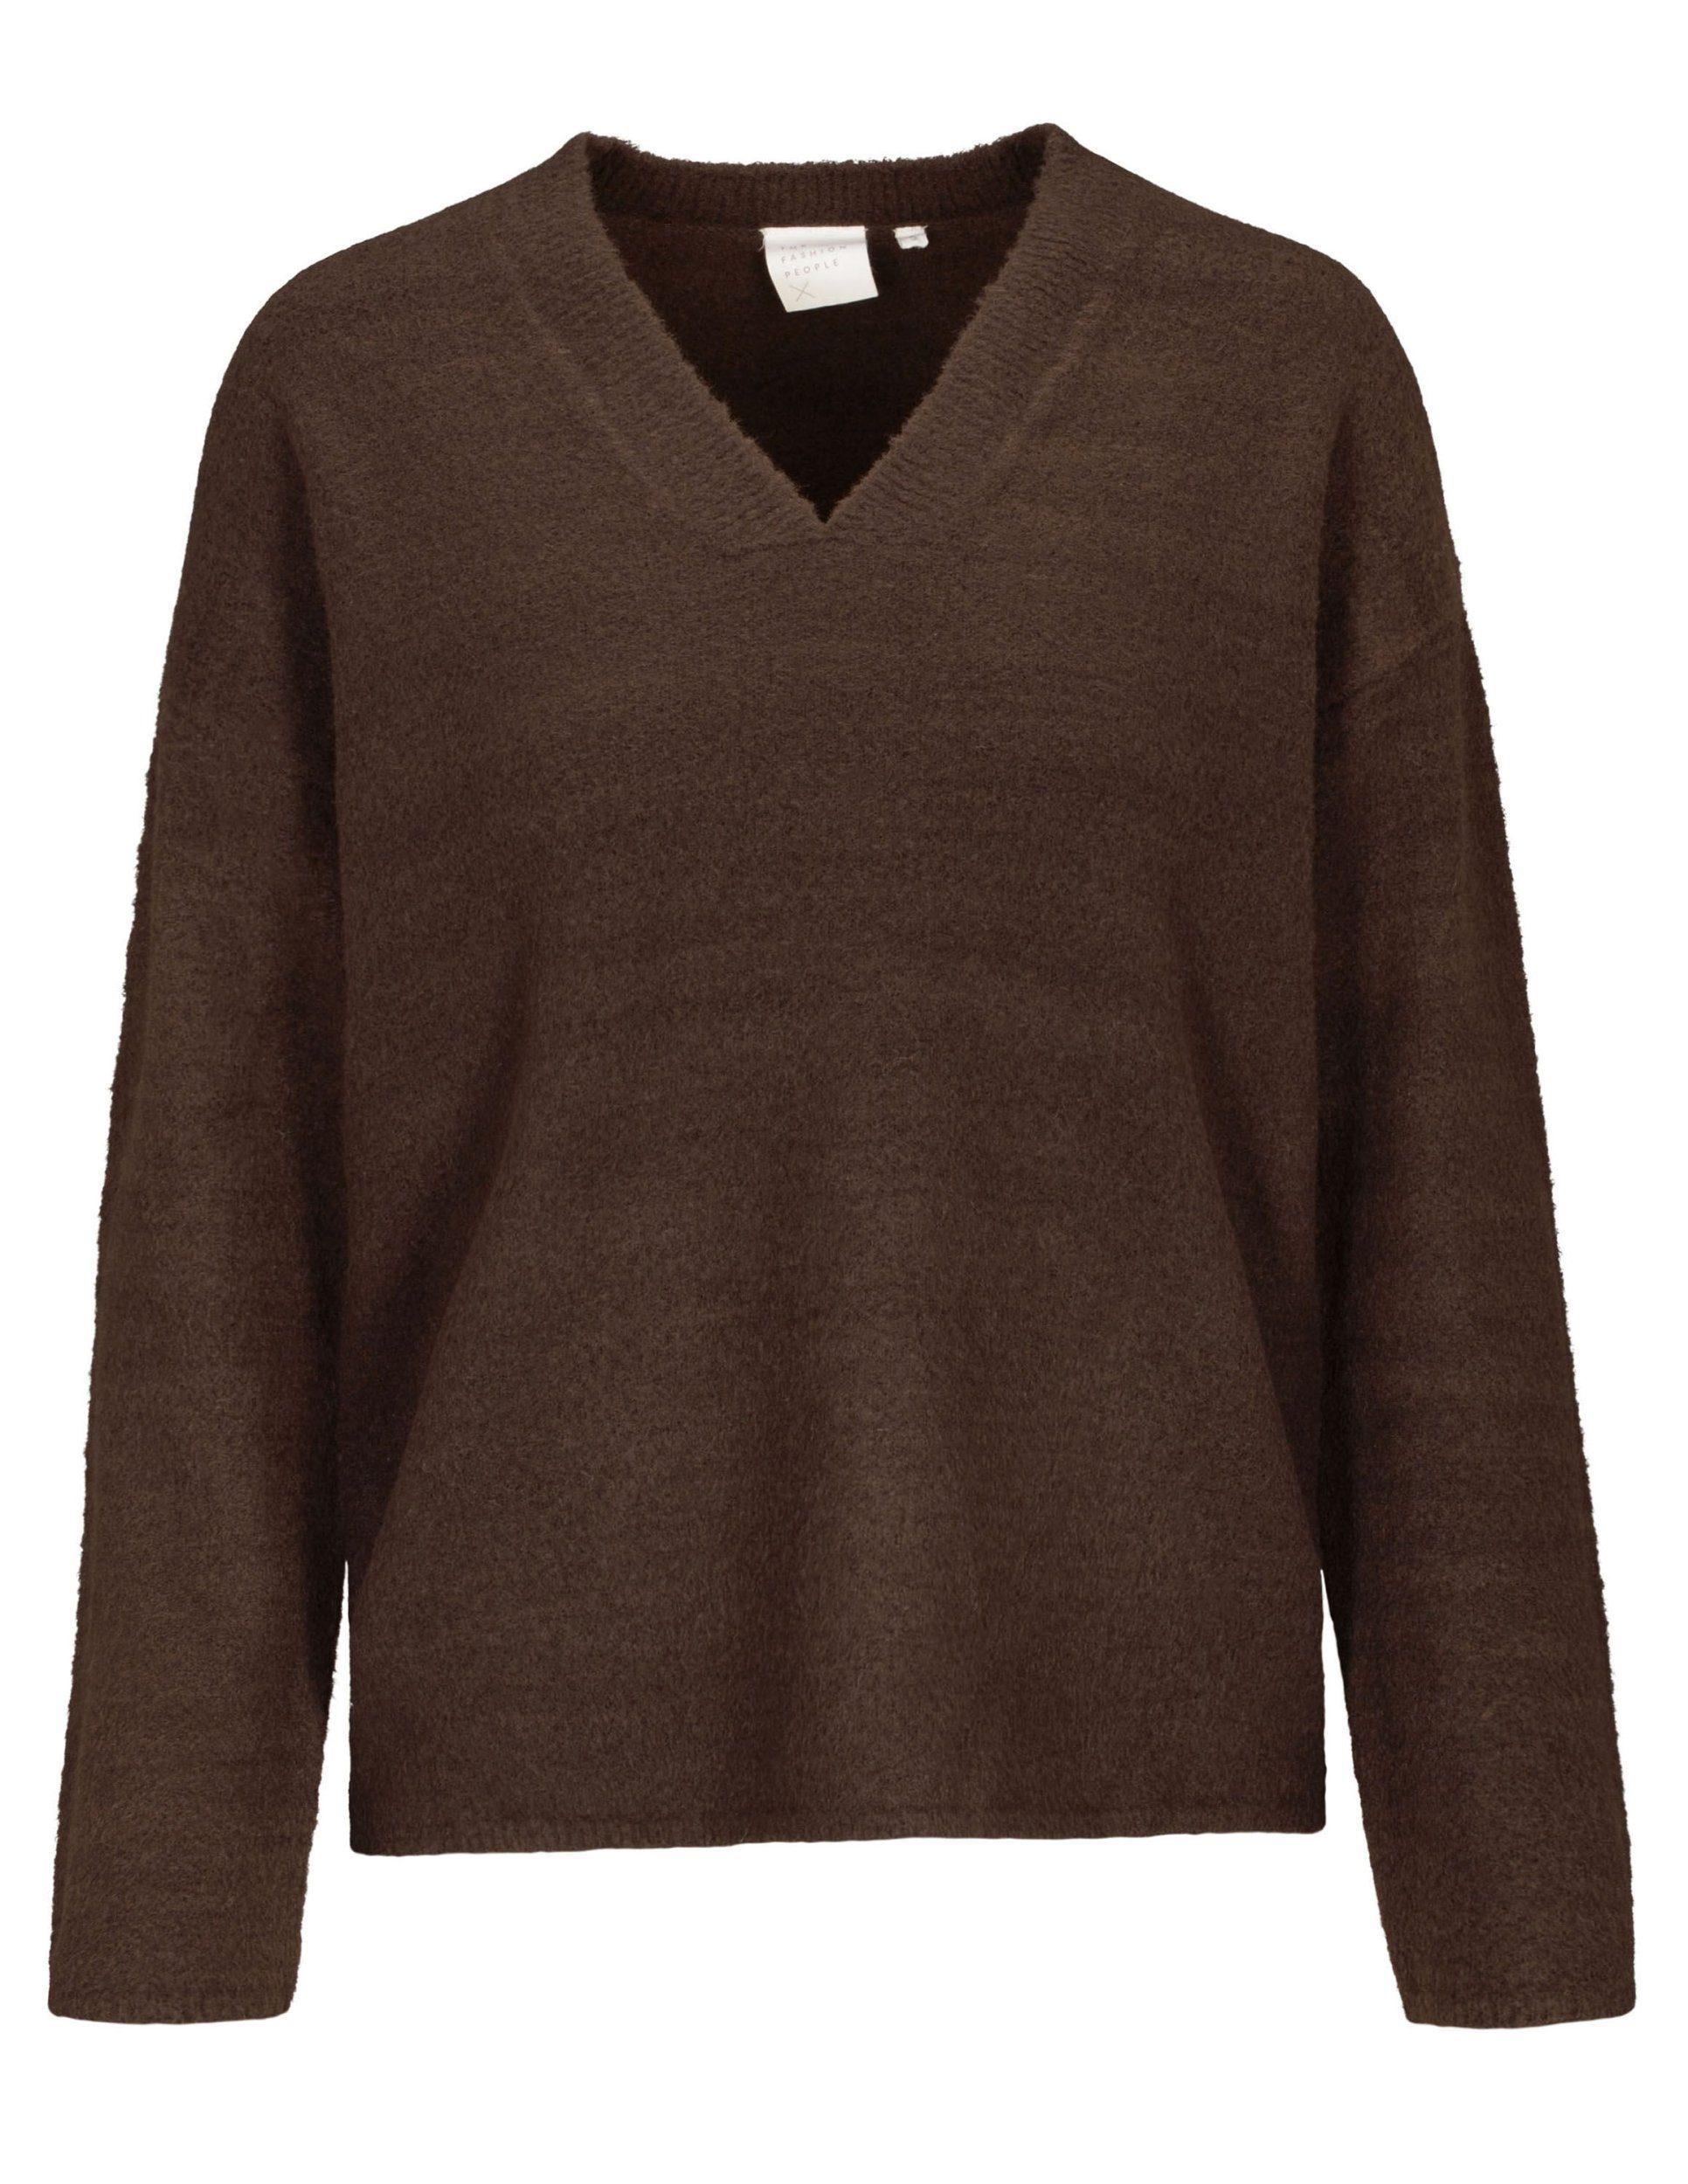 THE FASHION PEOPLE Kurzarmpullover Soft V-Neck, knitted DARK CHOCOLATE